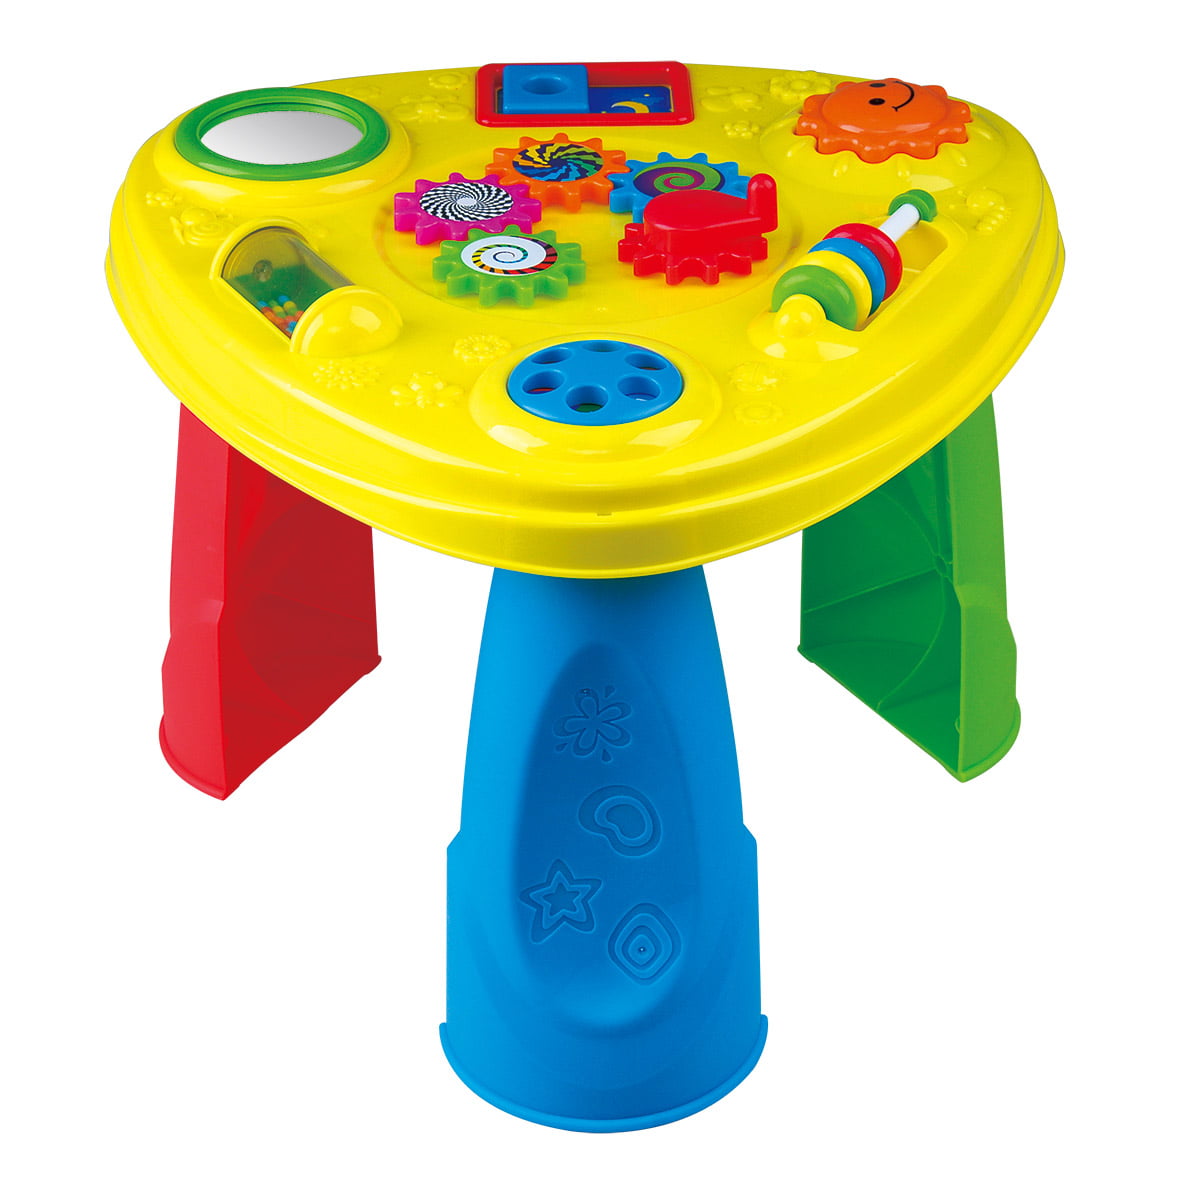 New Spark Create Imagine Learning Activity Table Toy Toddler 12 Months Unisex 